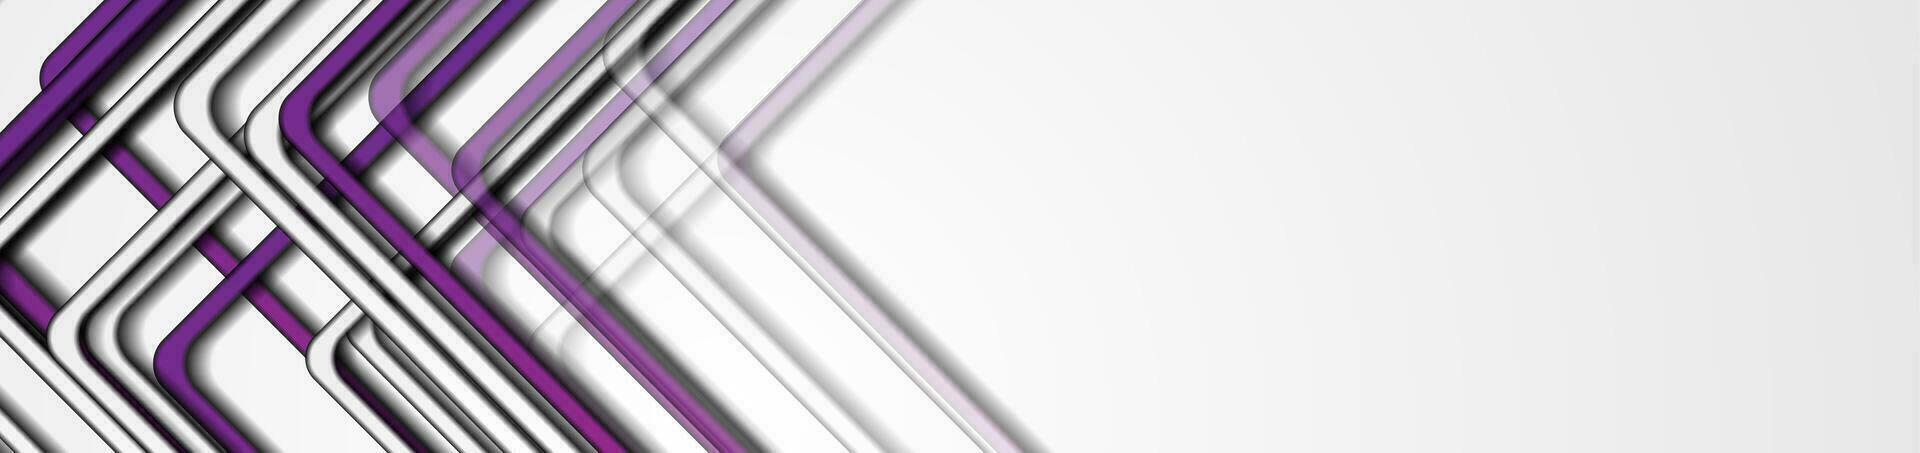 Violet and grey stripes abstract tech background vector